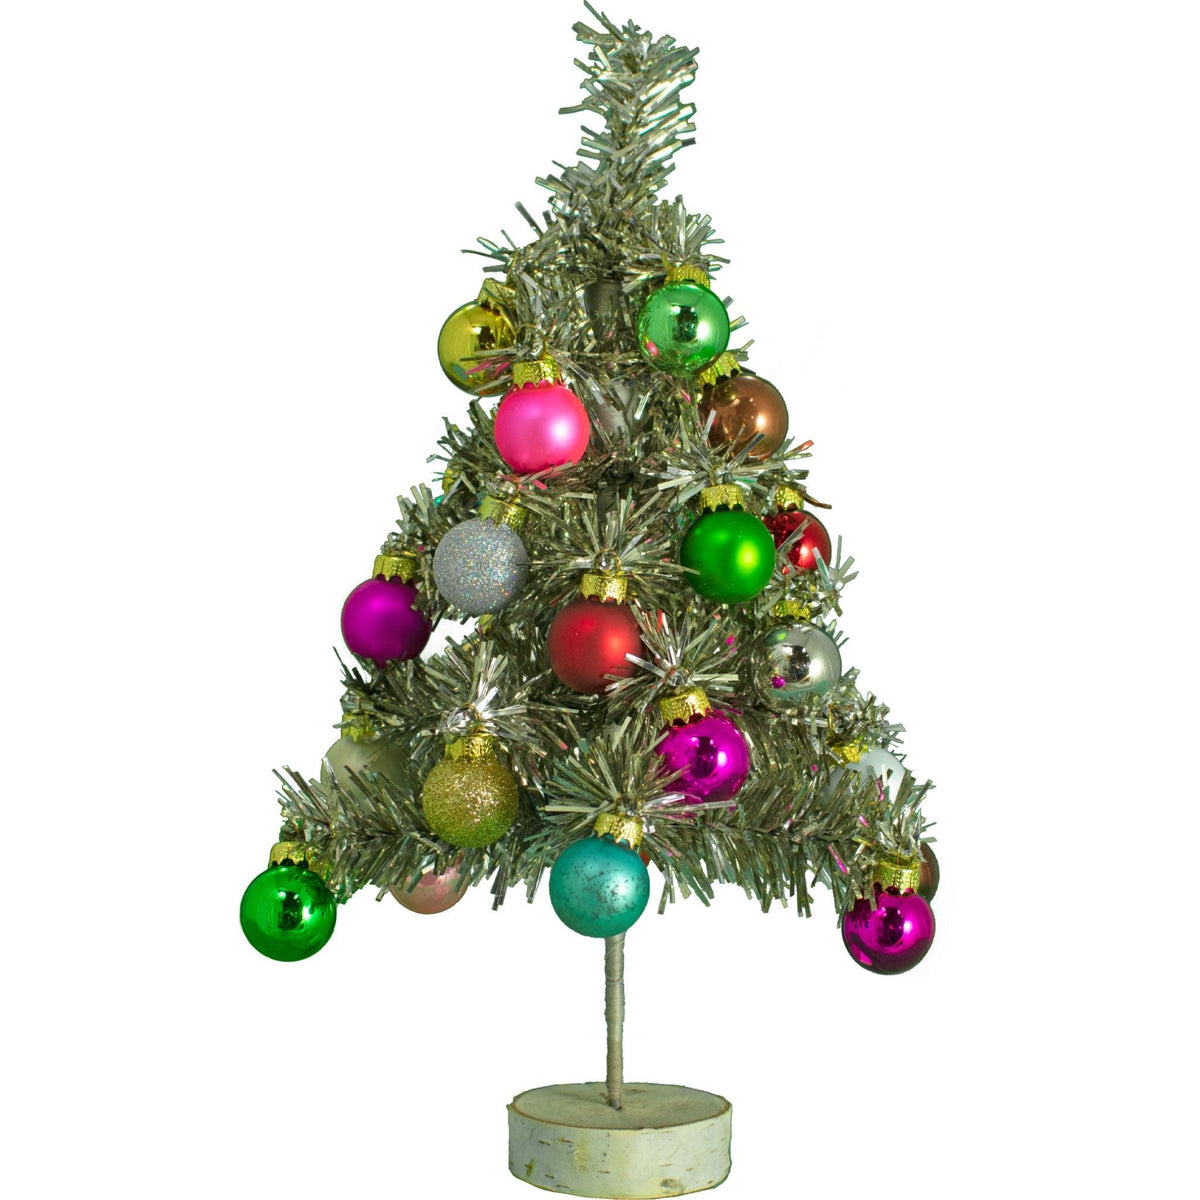 12in Mini Antique Silver Tinsel Christmas Trees on sale at leedisplay.com.  Mini Ball Ornaments not included.